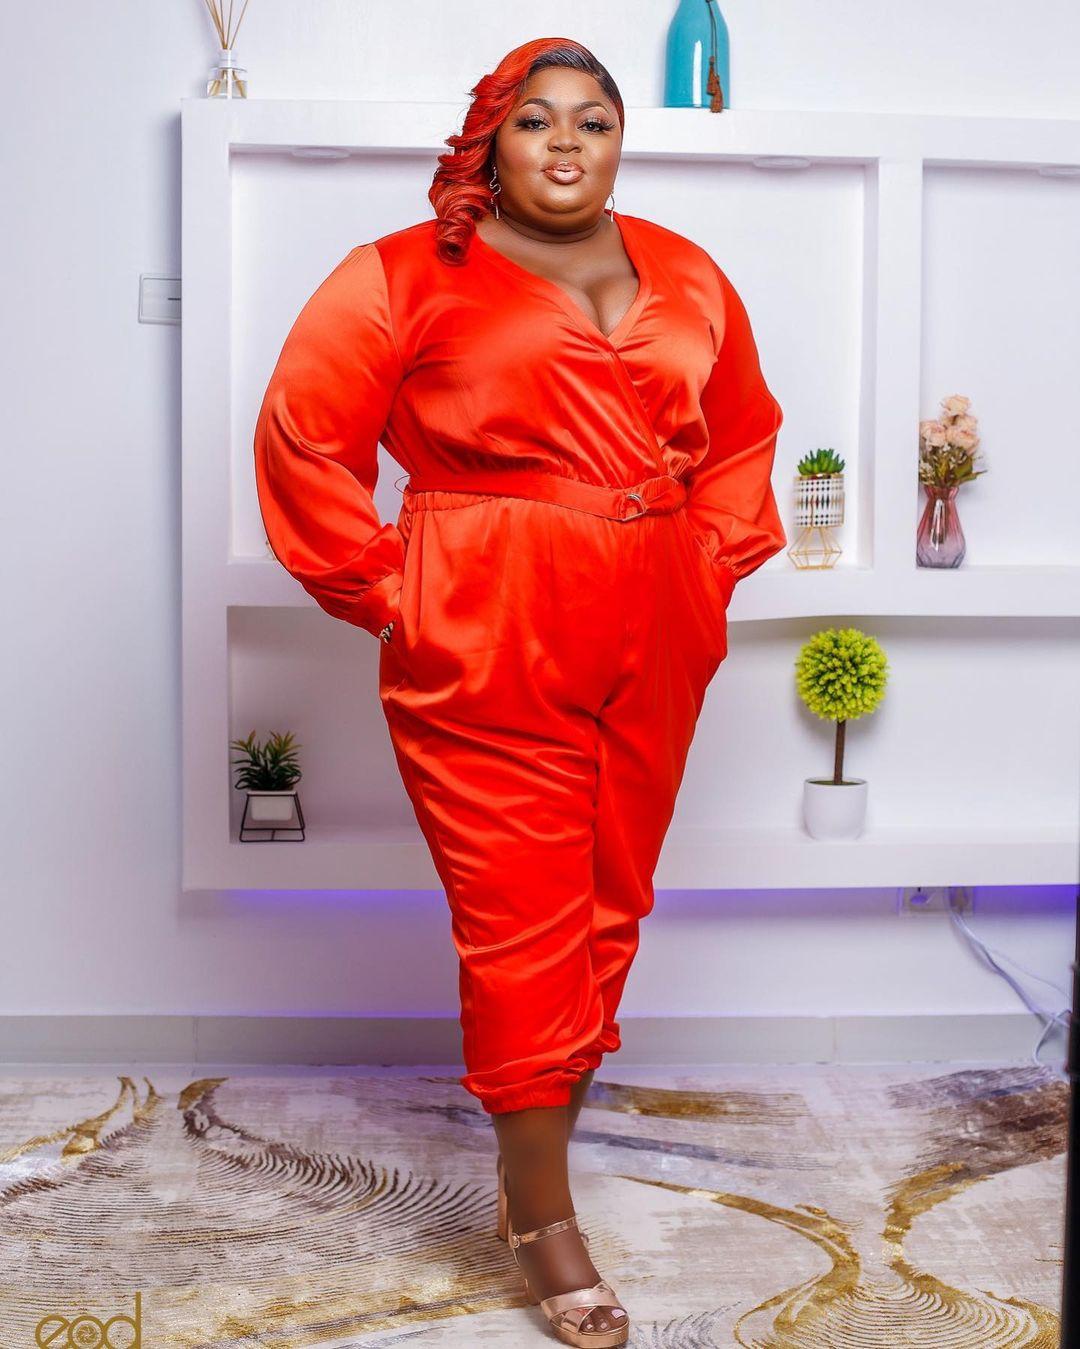 "Looking like LAWMA staff" - Eniola Badmus dragged over outfit to Headies